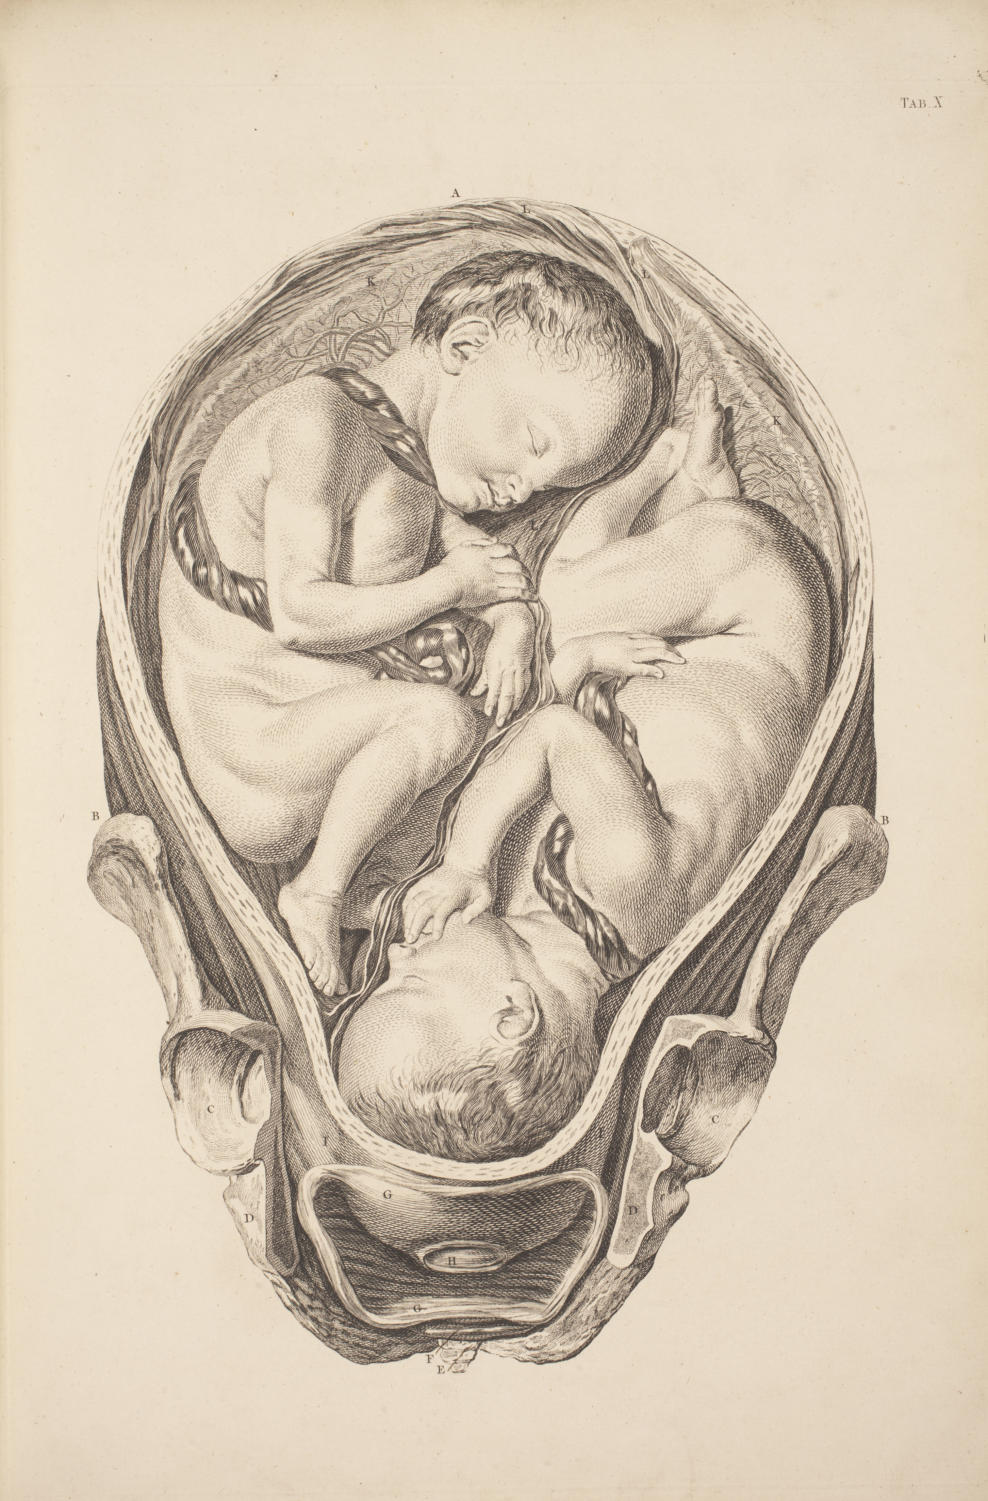 Twins in a mother’s womb encased by the bony pelvis. Smellie, A set of anatomical tables, with explanations, and an abridgement, of the practice of midwifery, 1754.